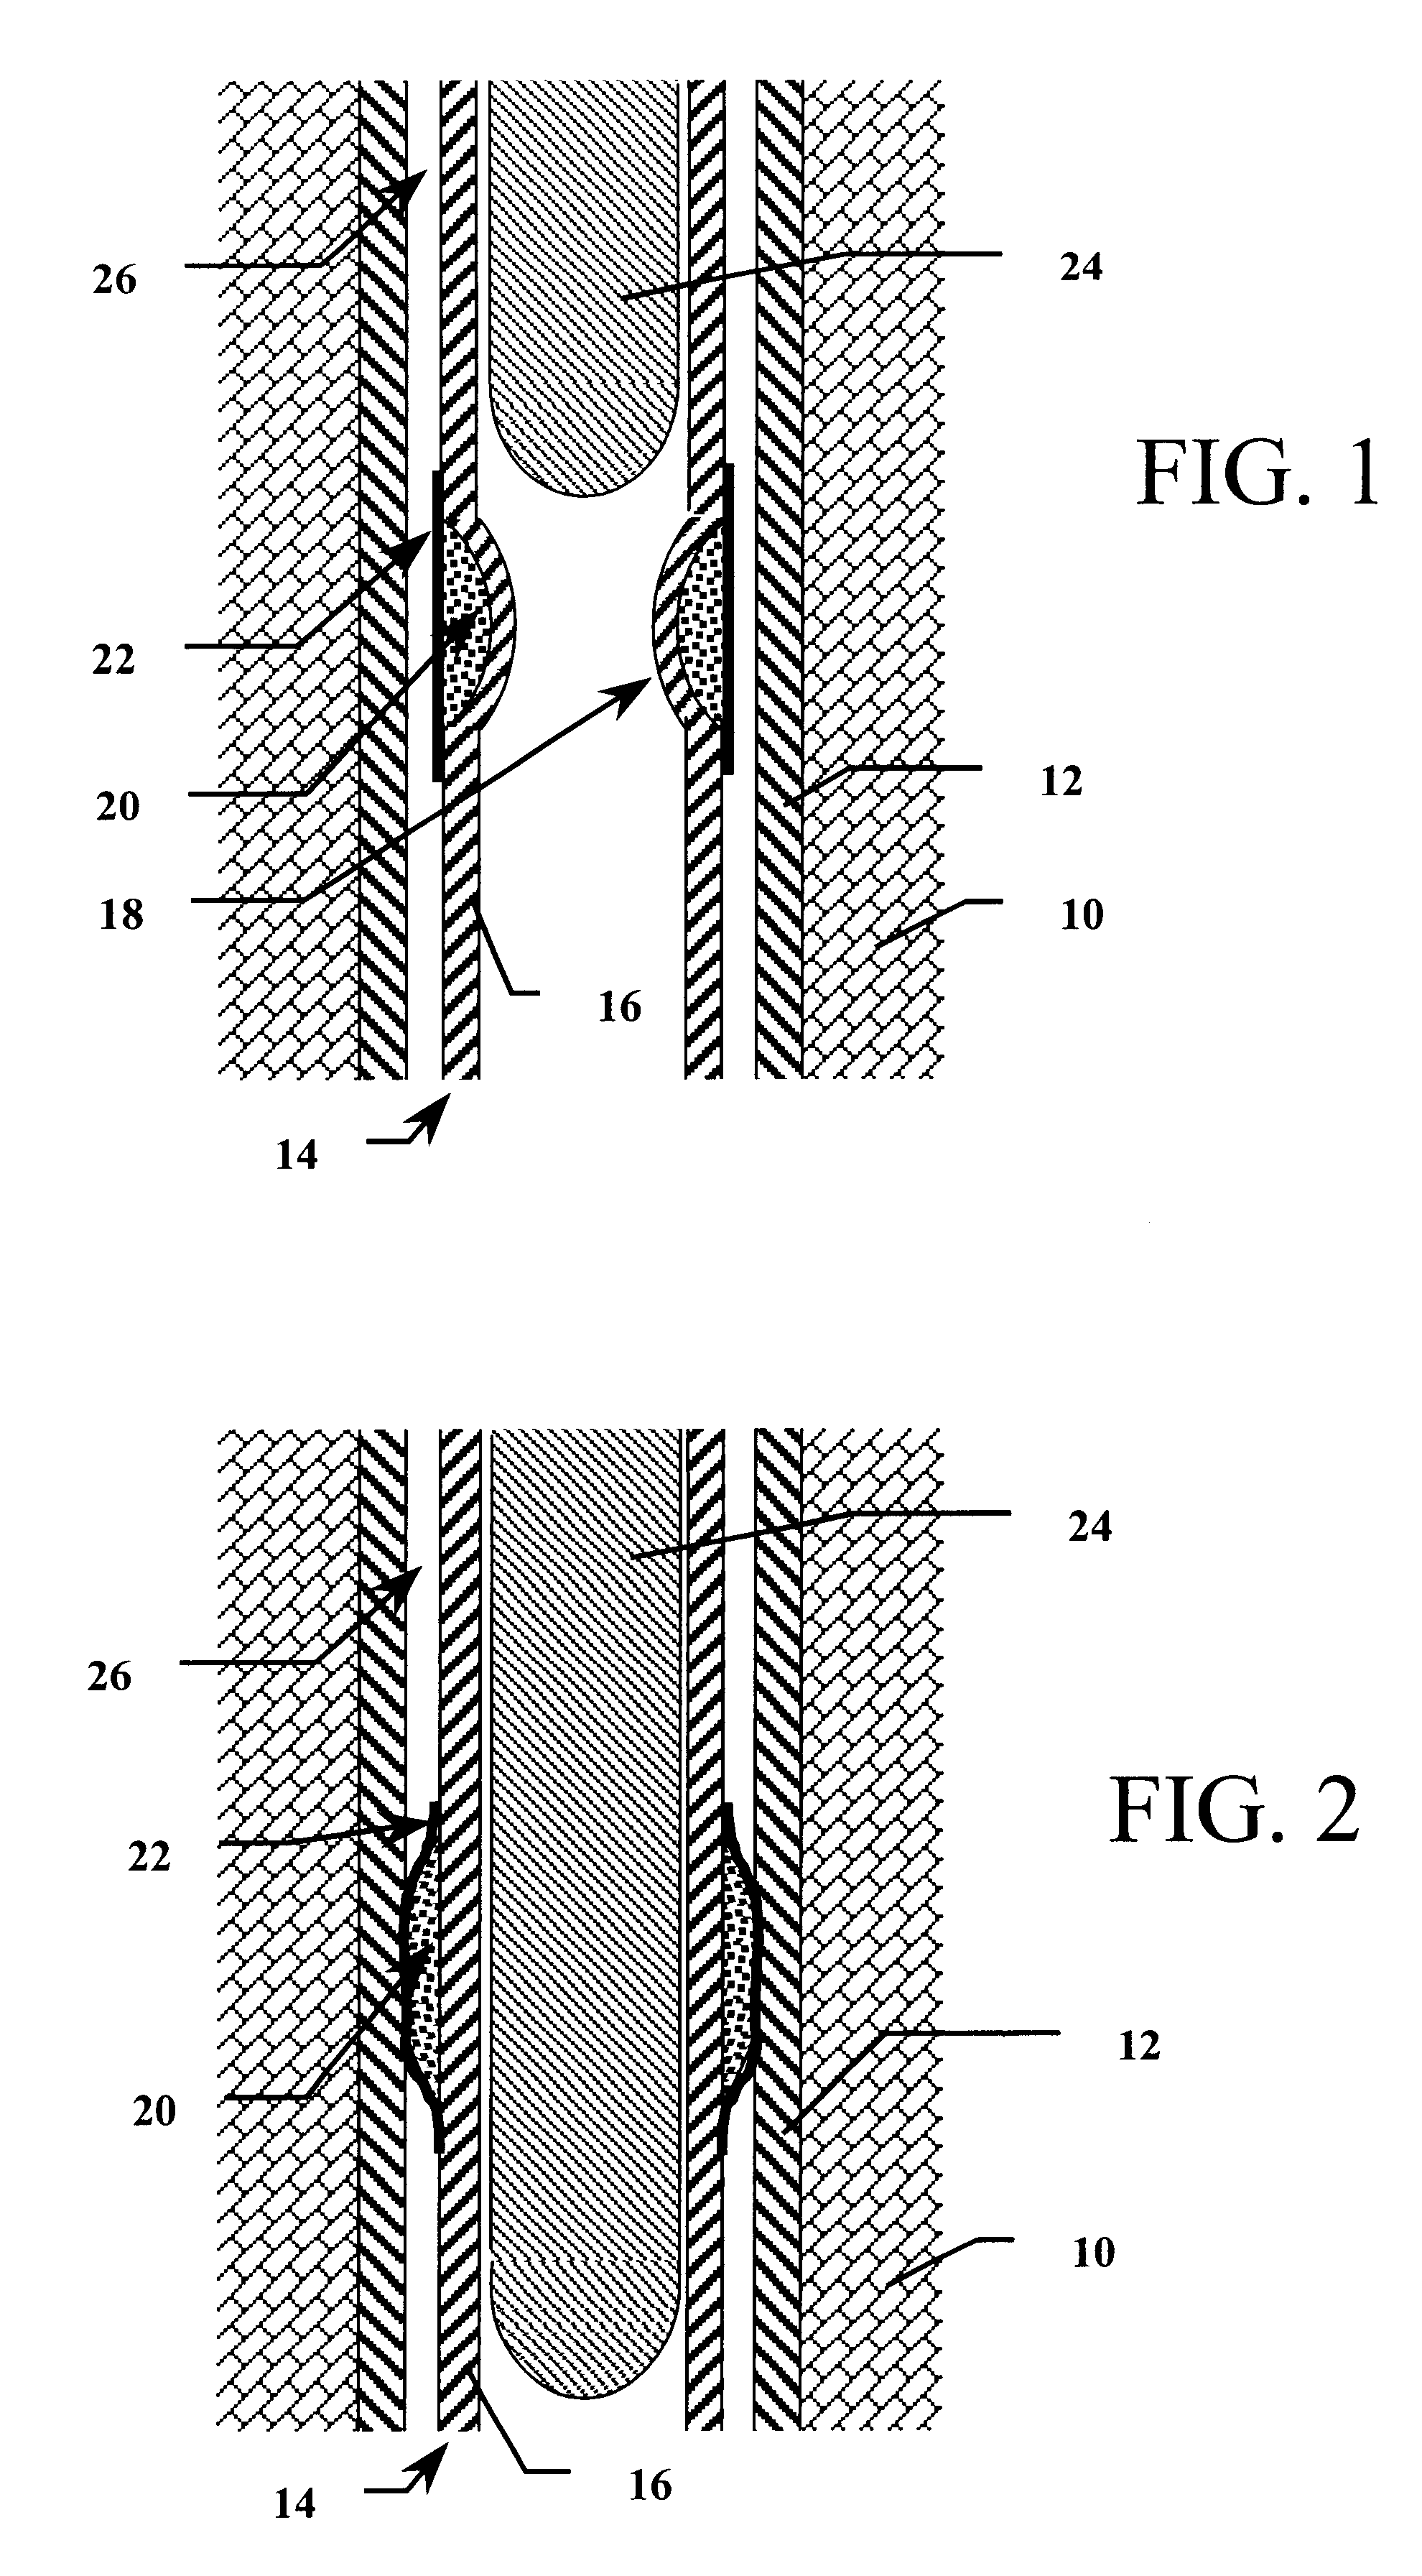 Method and apparatus for expansion sealing concentric tubular structures